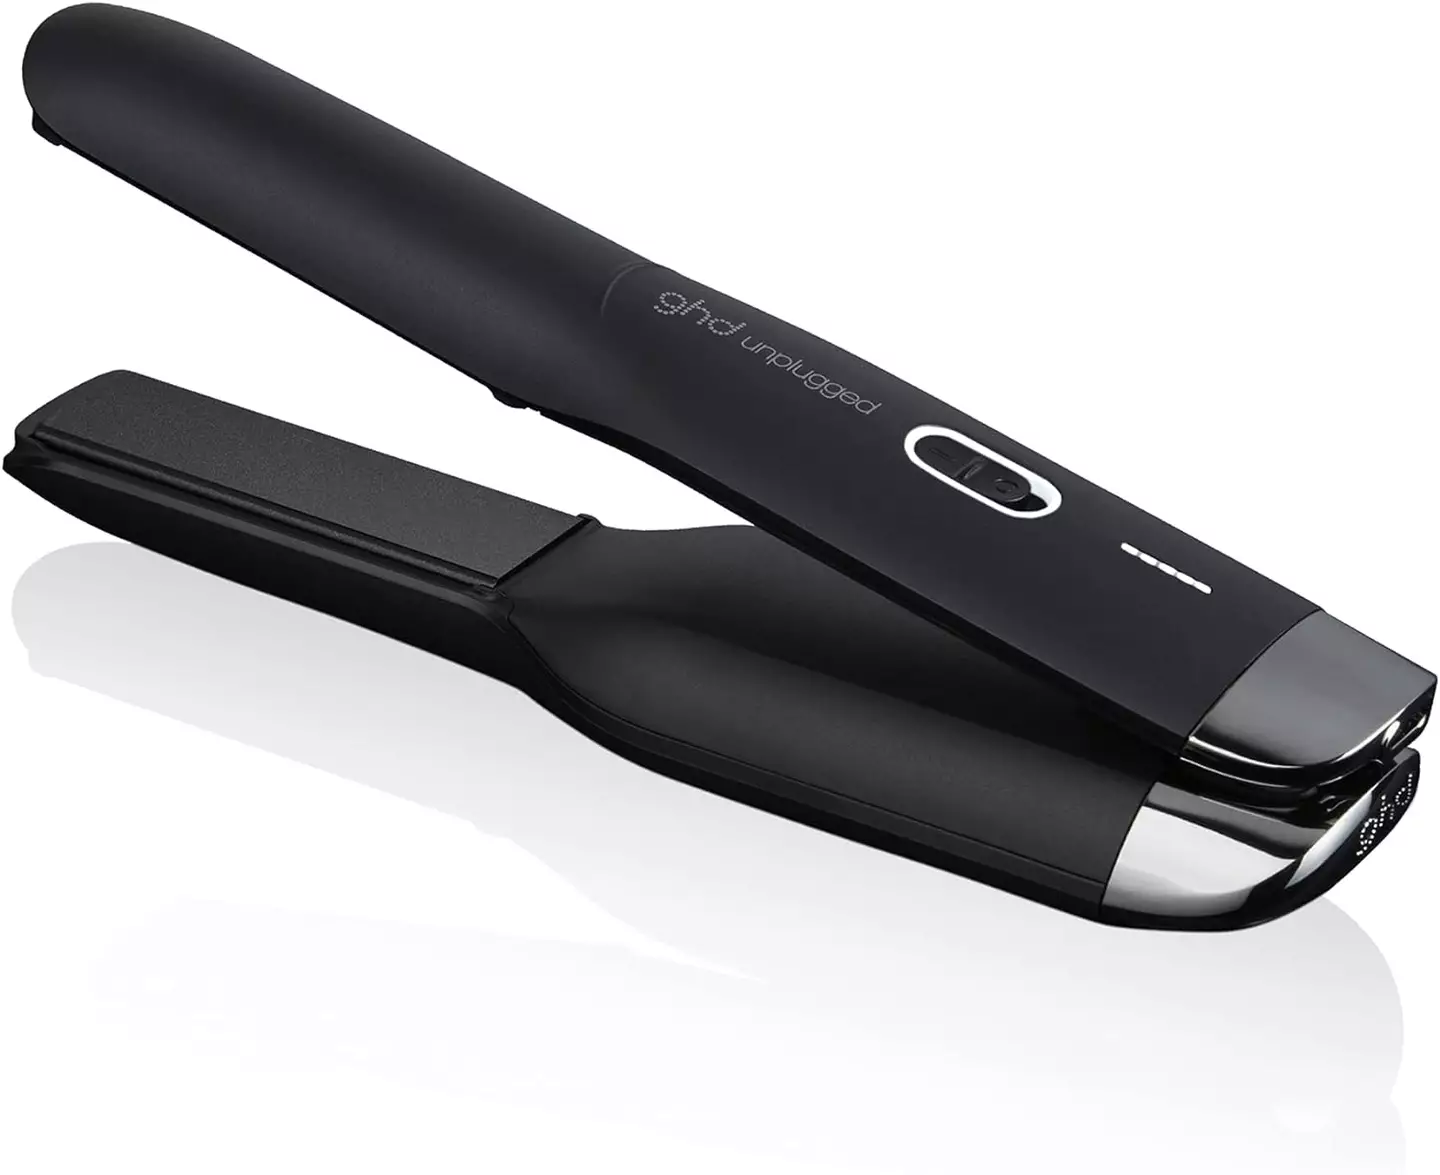 The cordless Unplugged styler gives you great hair on-the-go.